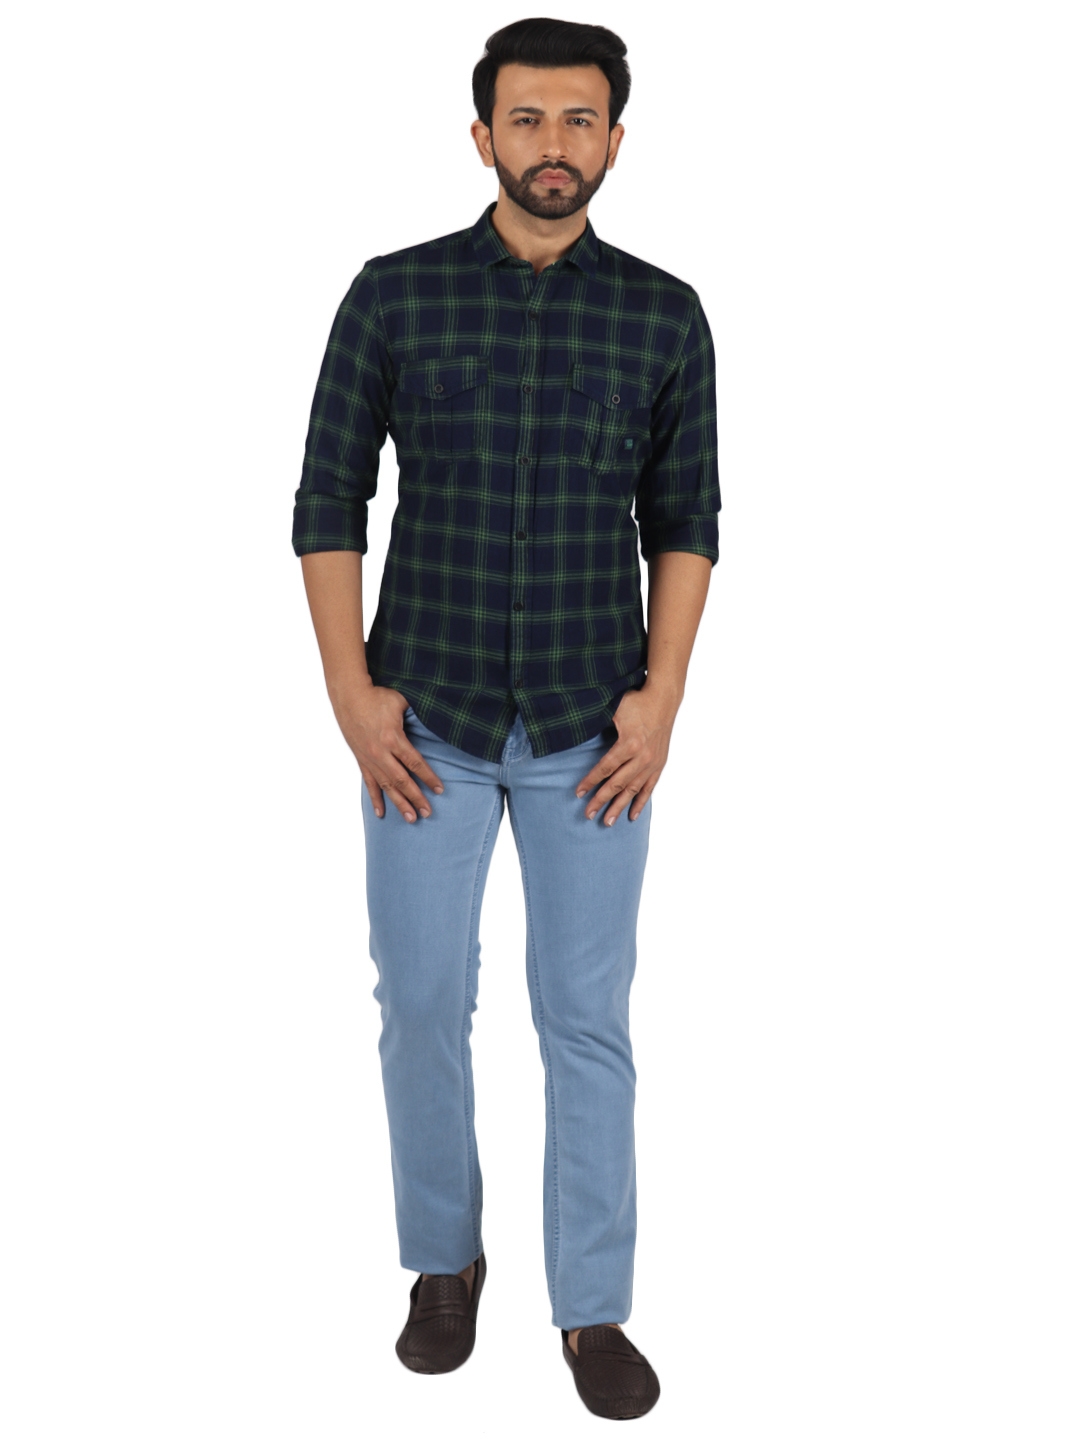 D'cot by Donear | D'cot by Donear Men's Green and Navy Cotton Casual Shirts 4